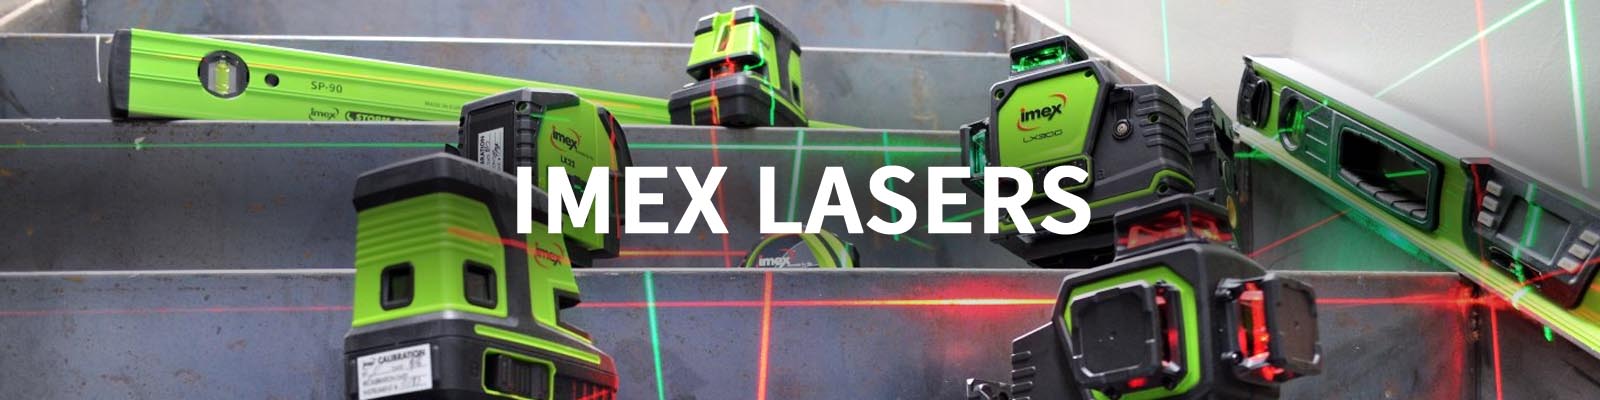 Imex Lasers on Building Site